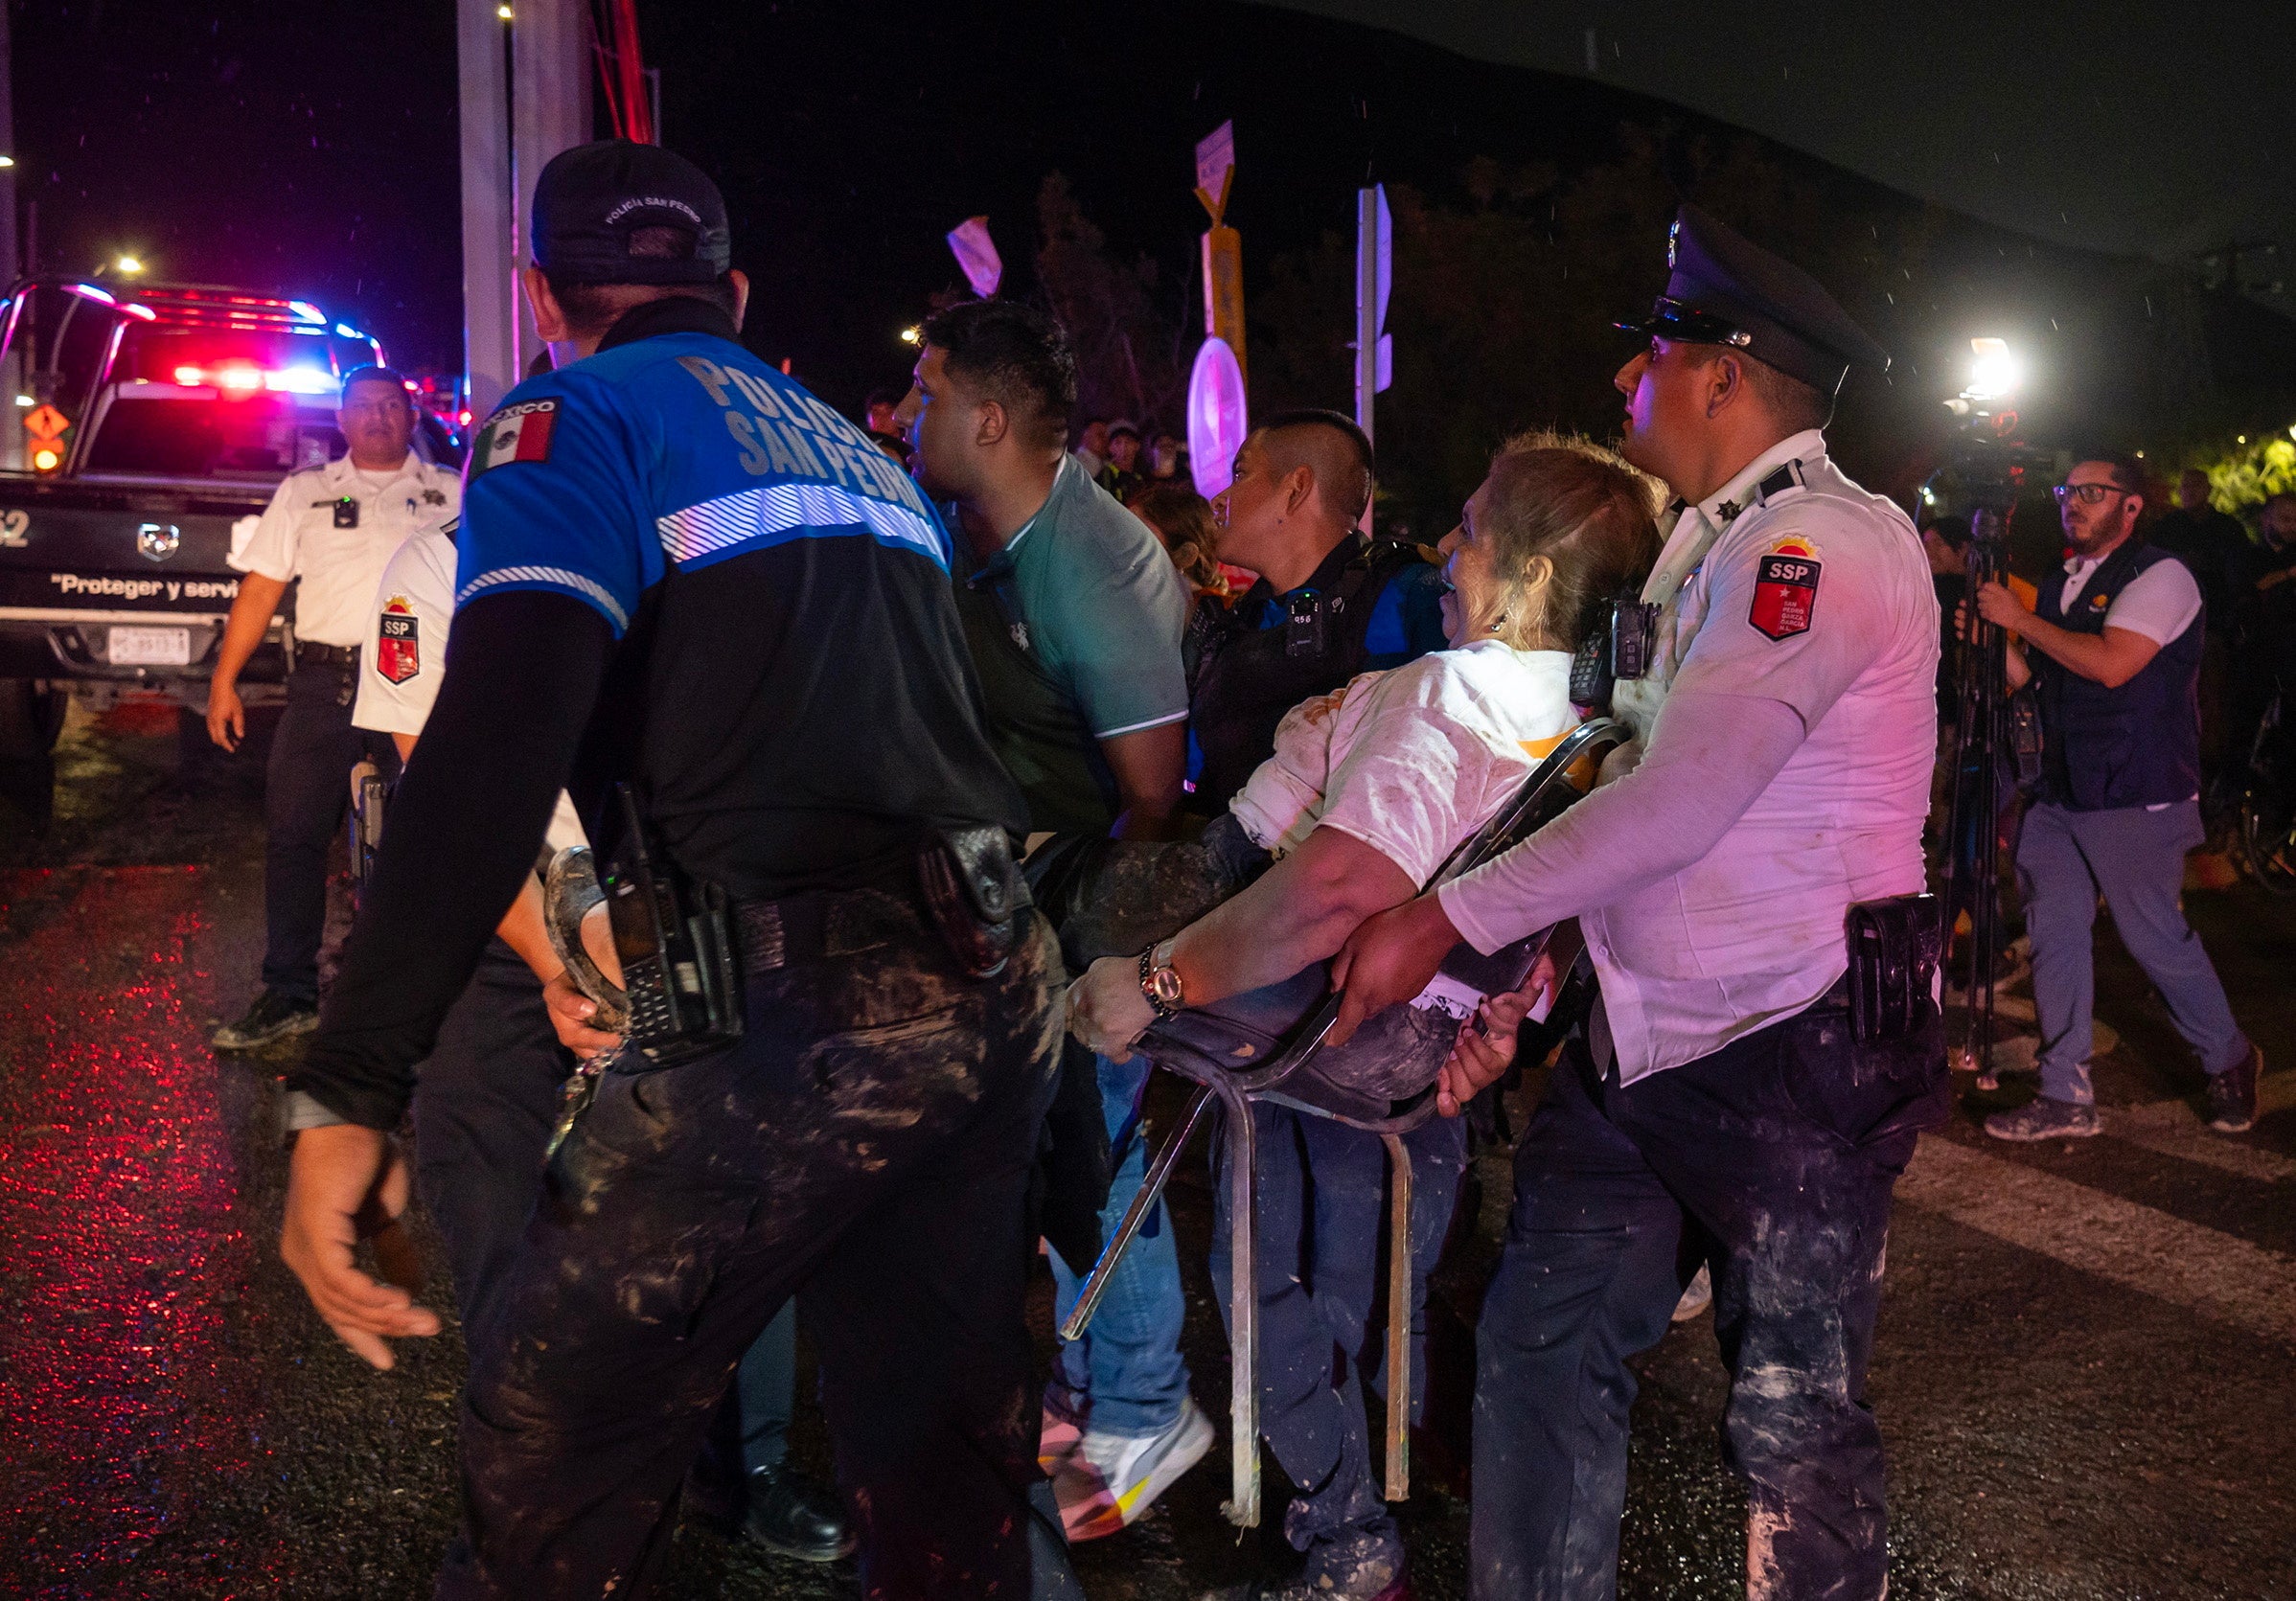 Paramedics evacuate one of the injured people after a stage collapsed at an election campaign rally in a suburb of Monterrey, capital of the northern Nuevo Leon state, Mexico